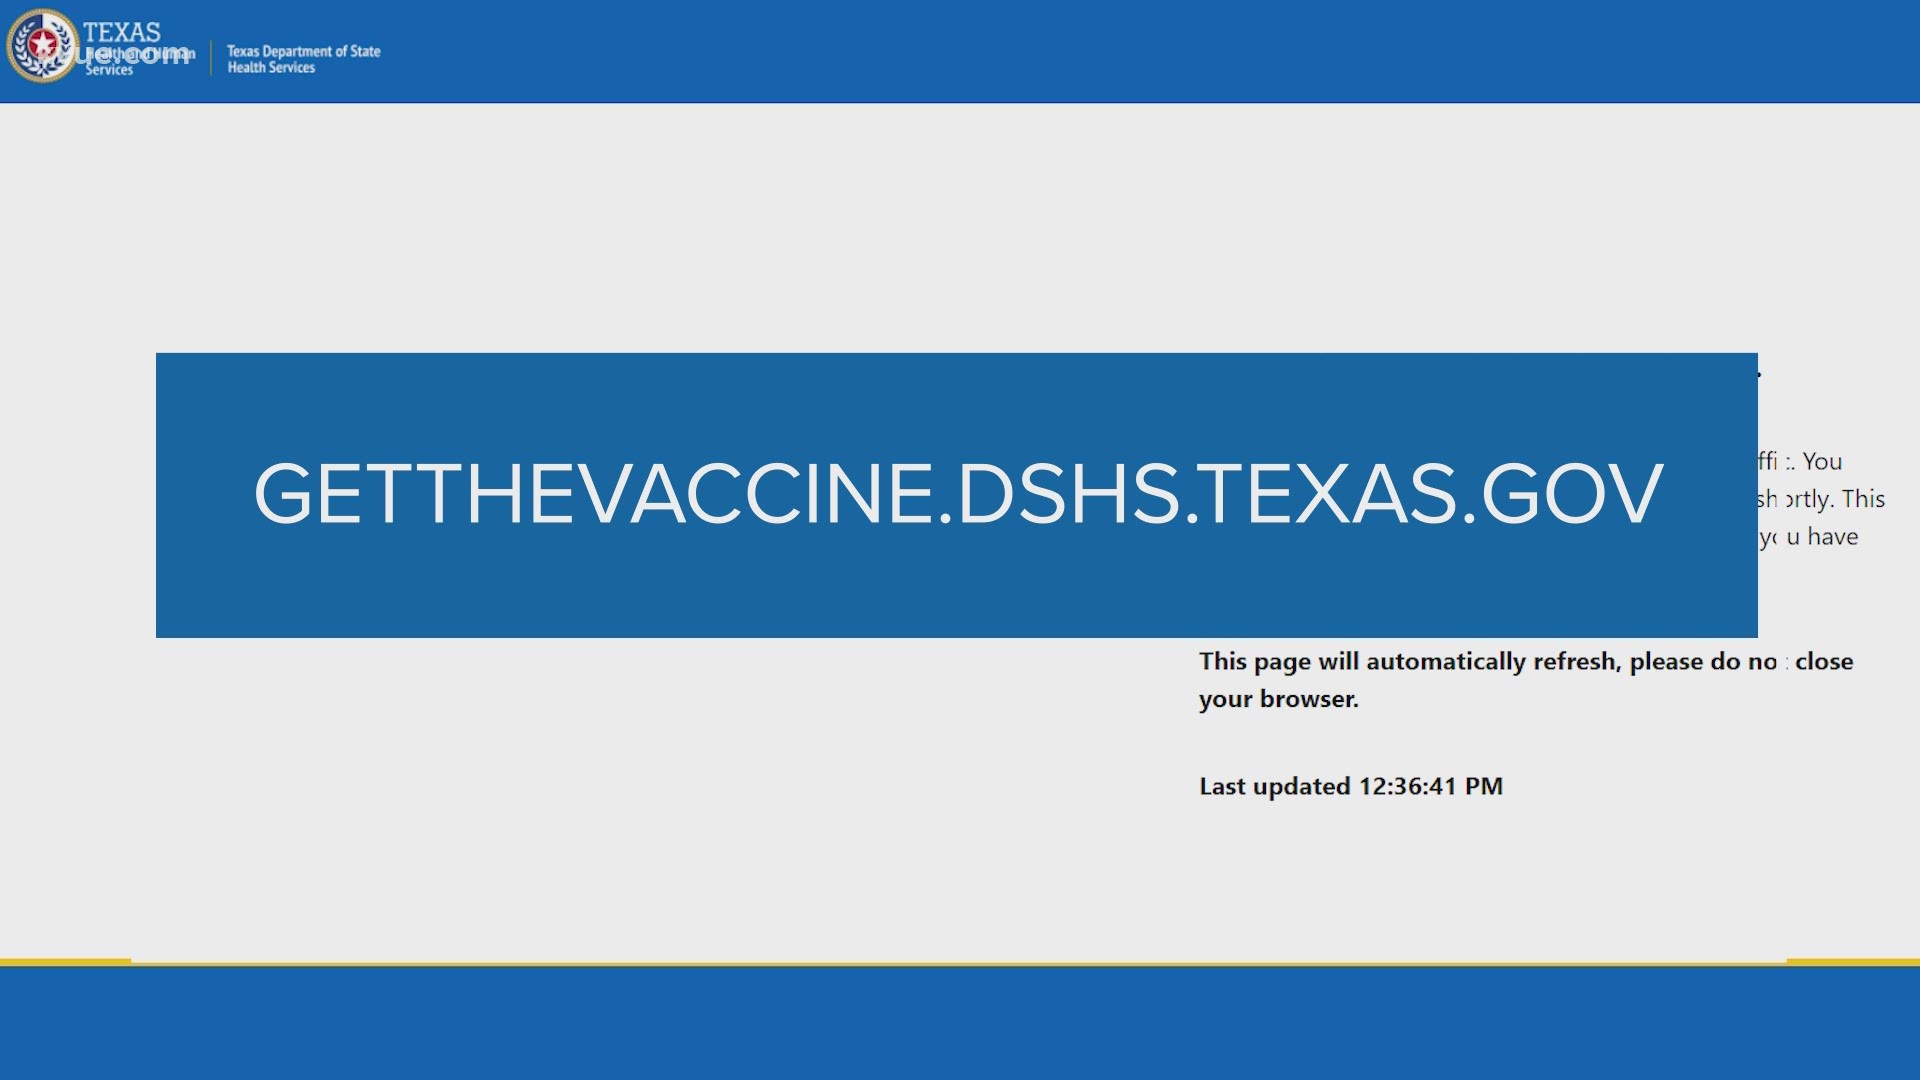 The Texas Department of State Health Services launched a new tool to help residents get the COVID-19 vaccine.